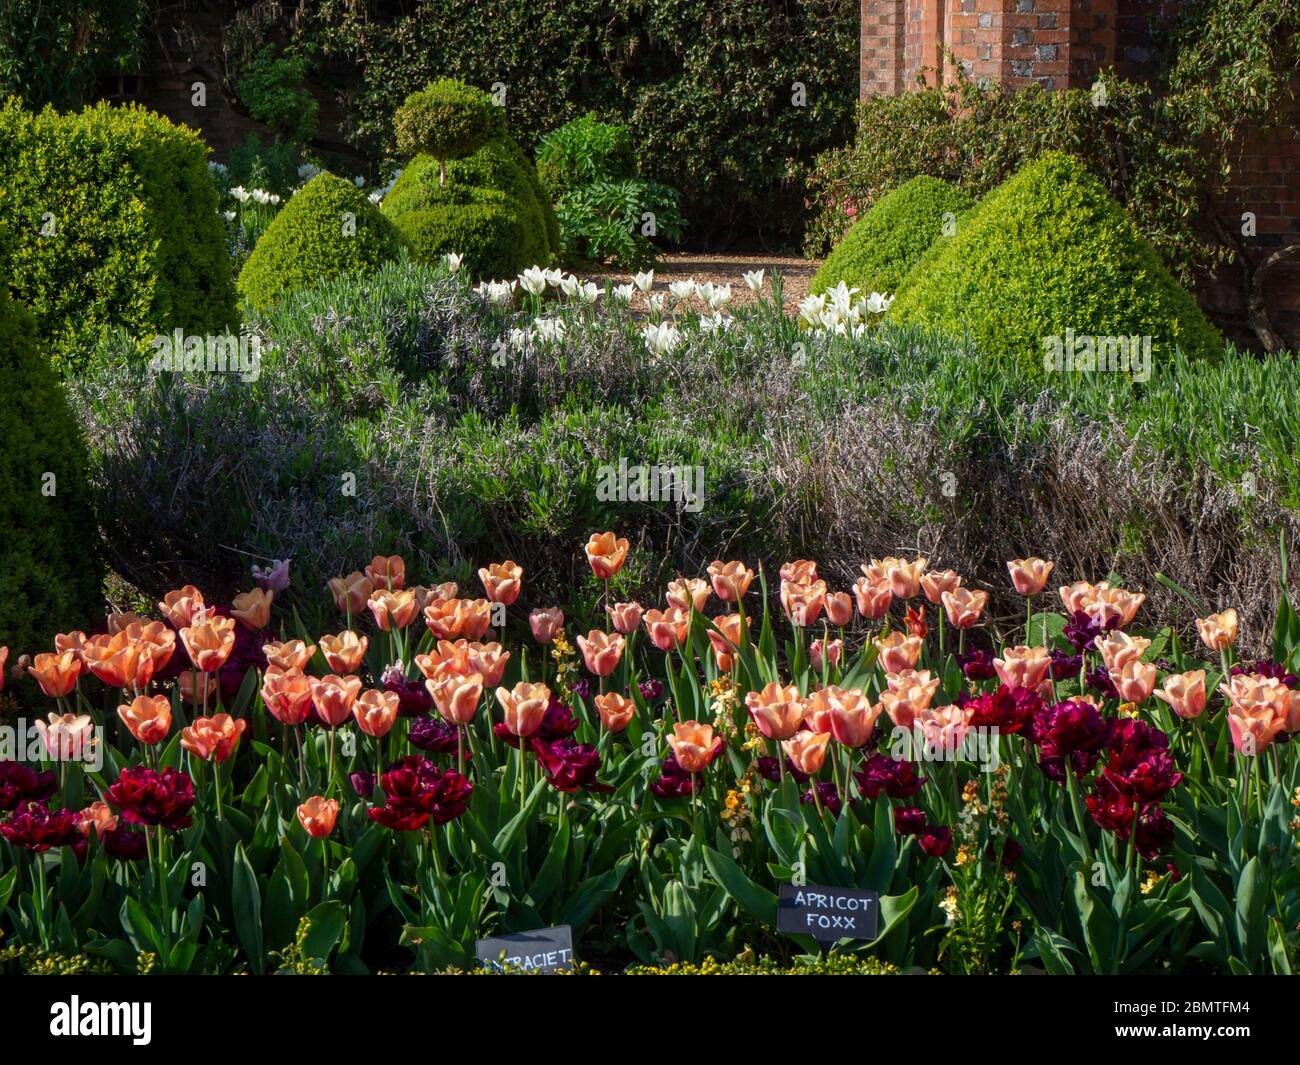 Tulip border at Chenies Manor Garden. Salmon pink Tulip Apricot Foxx and deep reddish purple Tulip Antraciet with a backdrop of Lavendar and topiary. Stock Photo